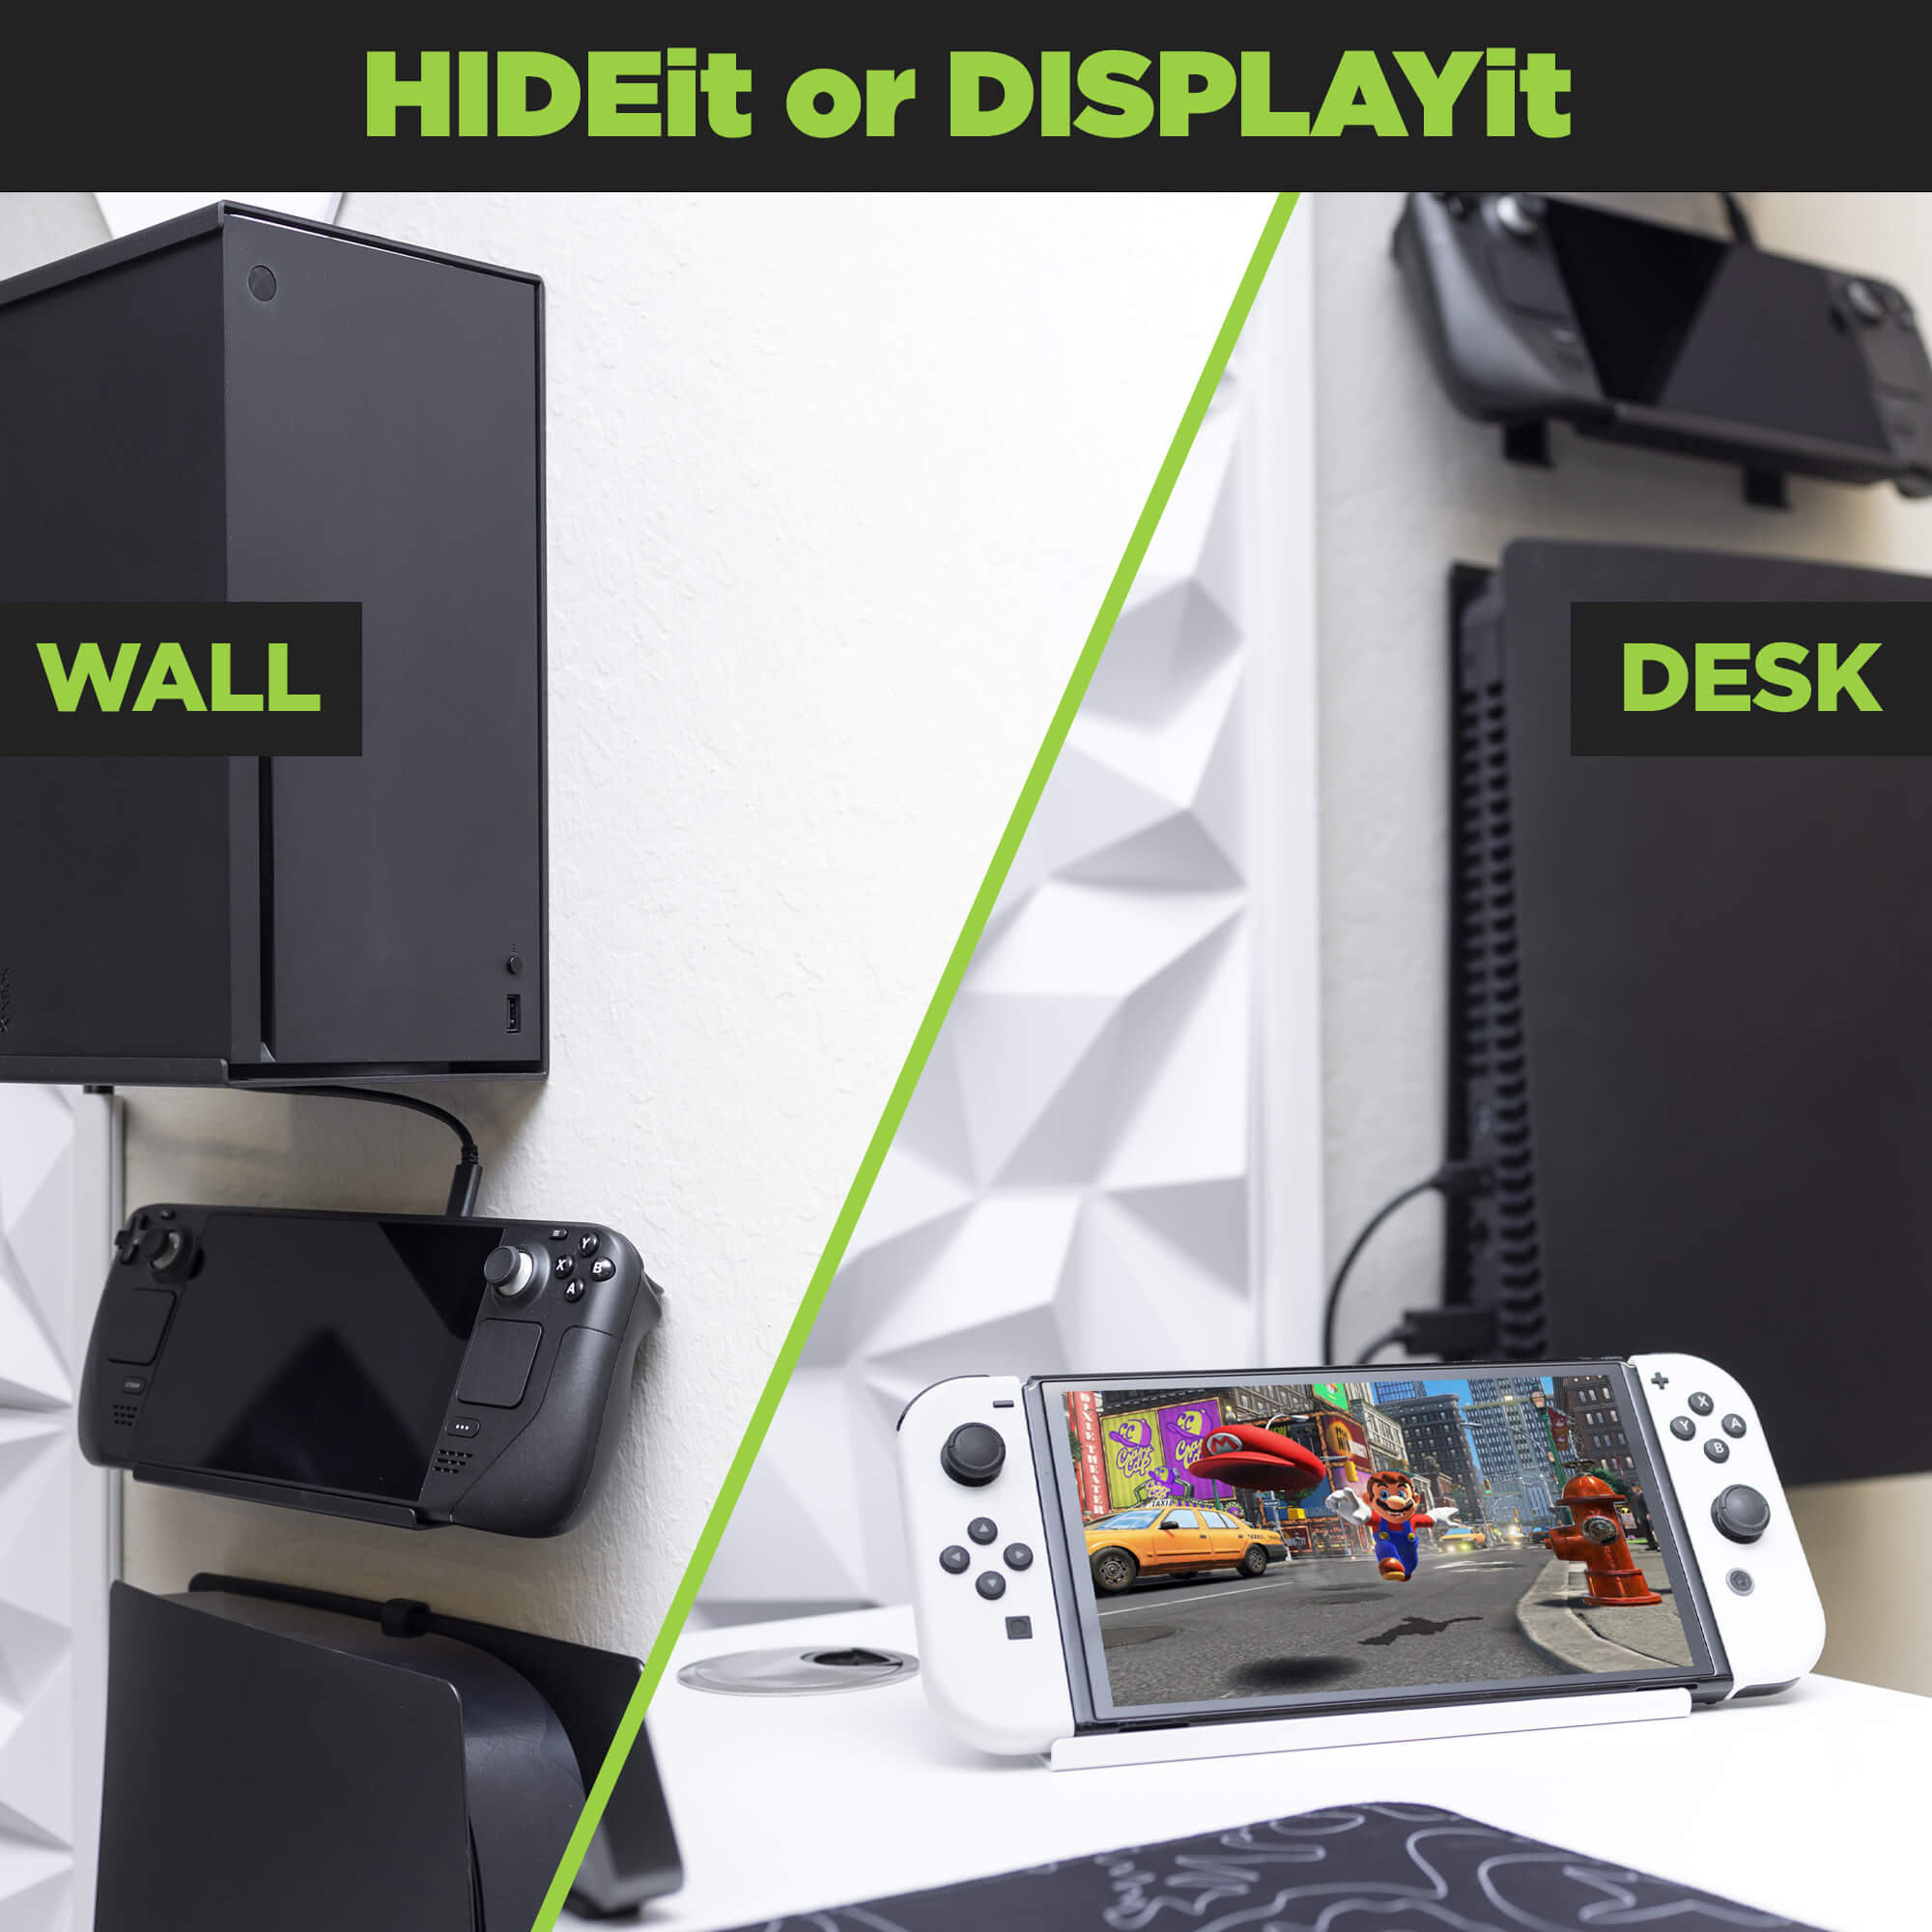 The HIDEit Mount for Steam Deck and handheld gaming devices works as a wall mount, pegboard mount, or stand on desk.